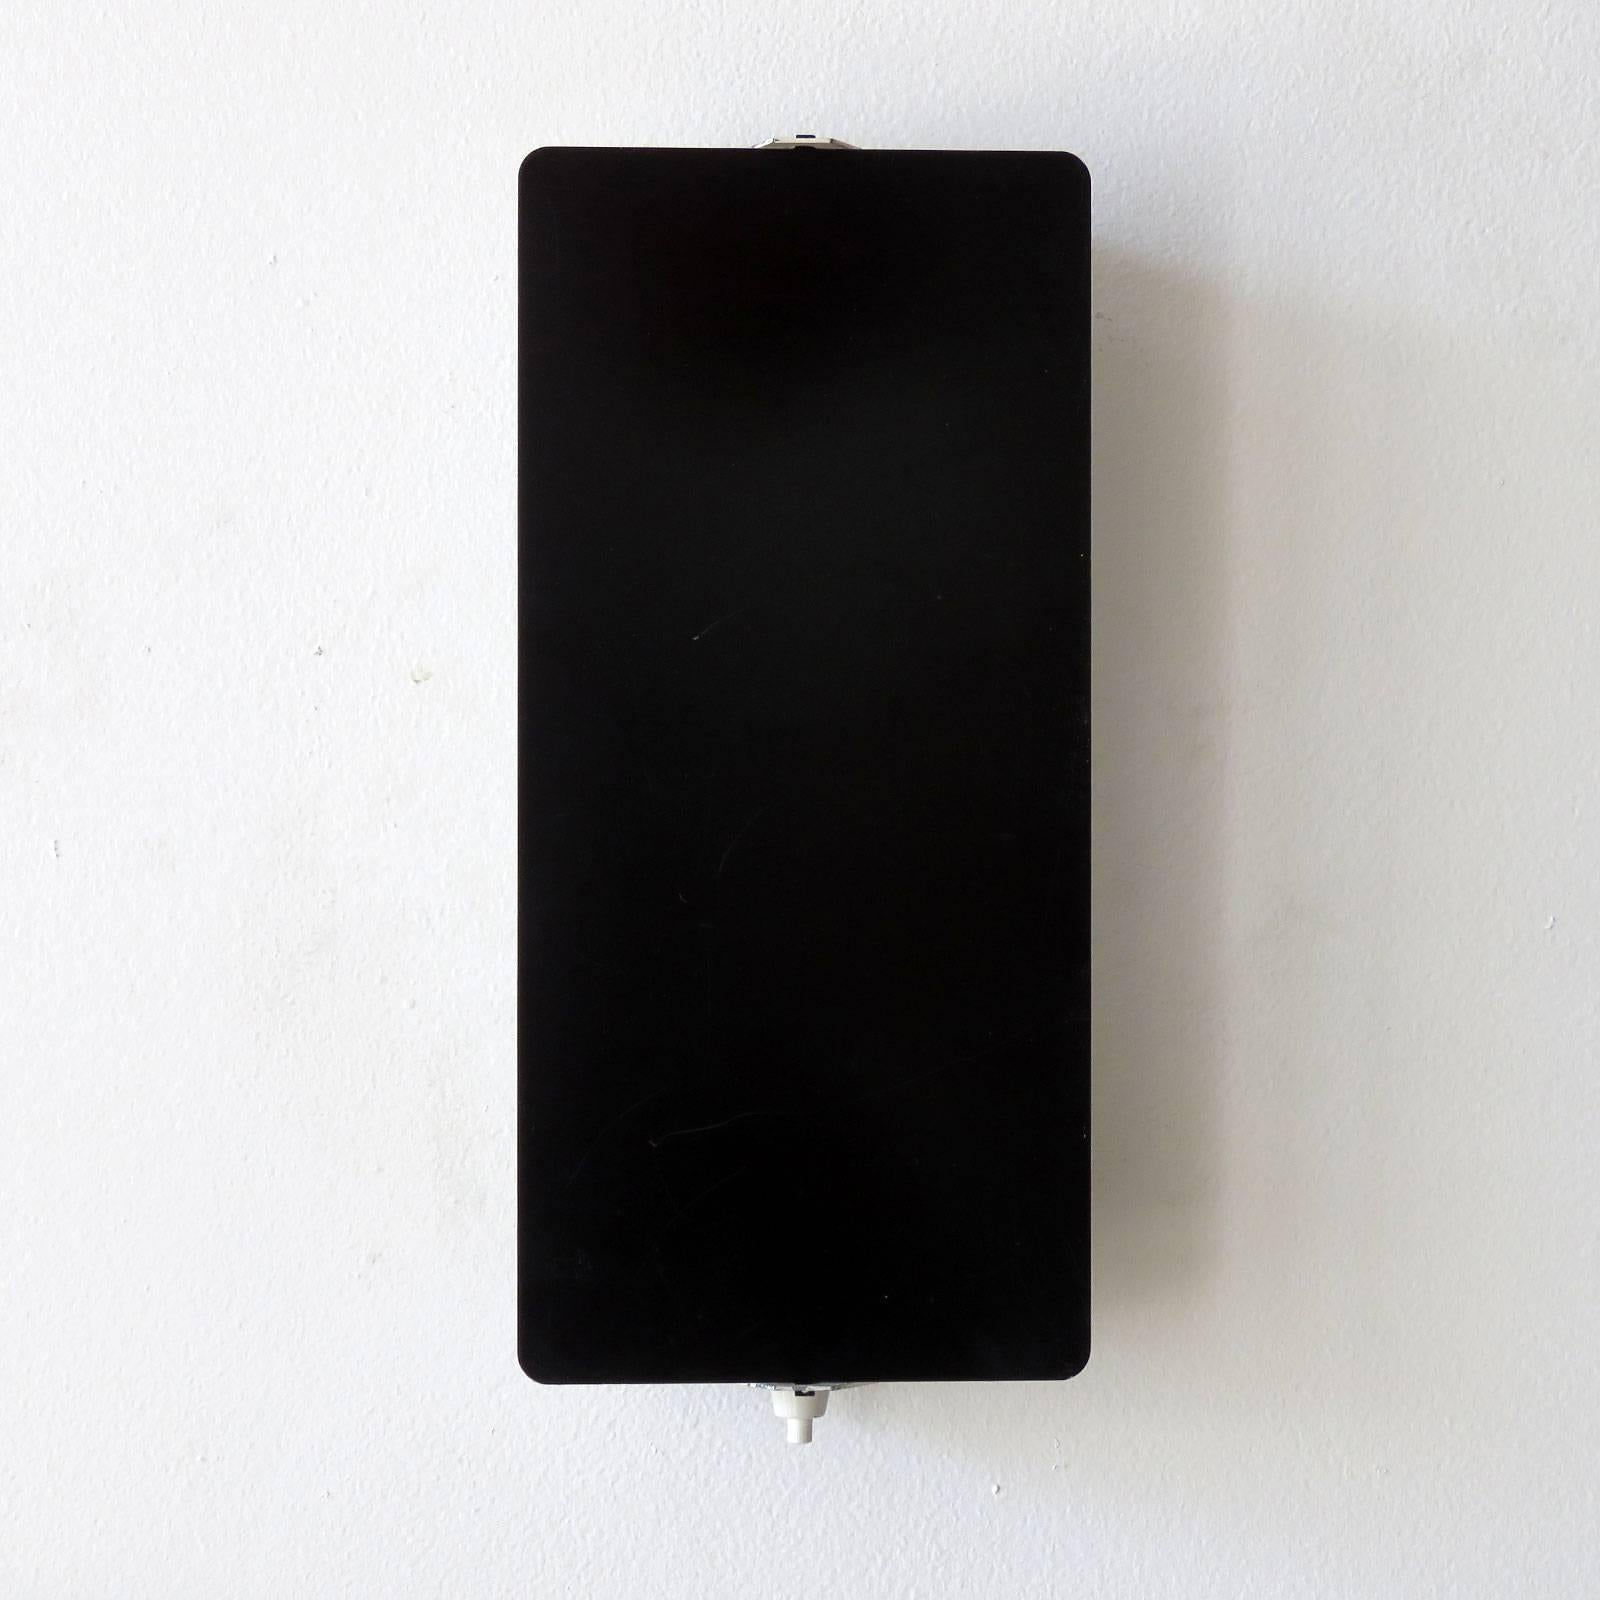 Rare large-scale enameled wall light by Charlotte Perriand with adjustable reflectors in black enameled finish with two sockets each, optional horizontal or vertical mount, manufactured and distributed by Steph Simon, Paris, marked.